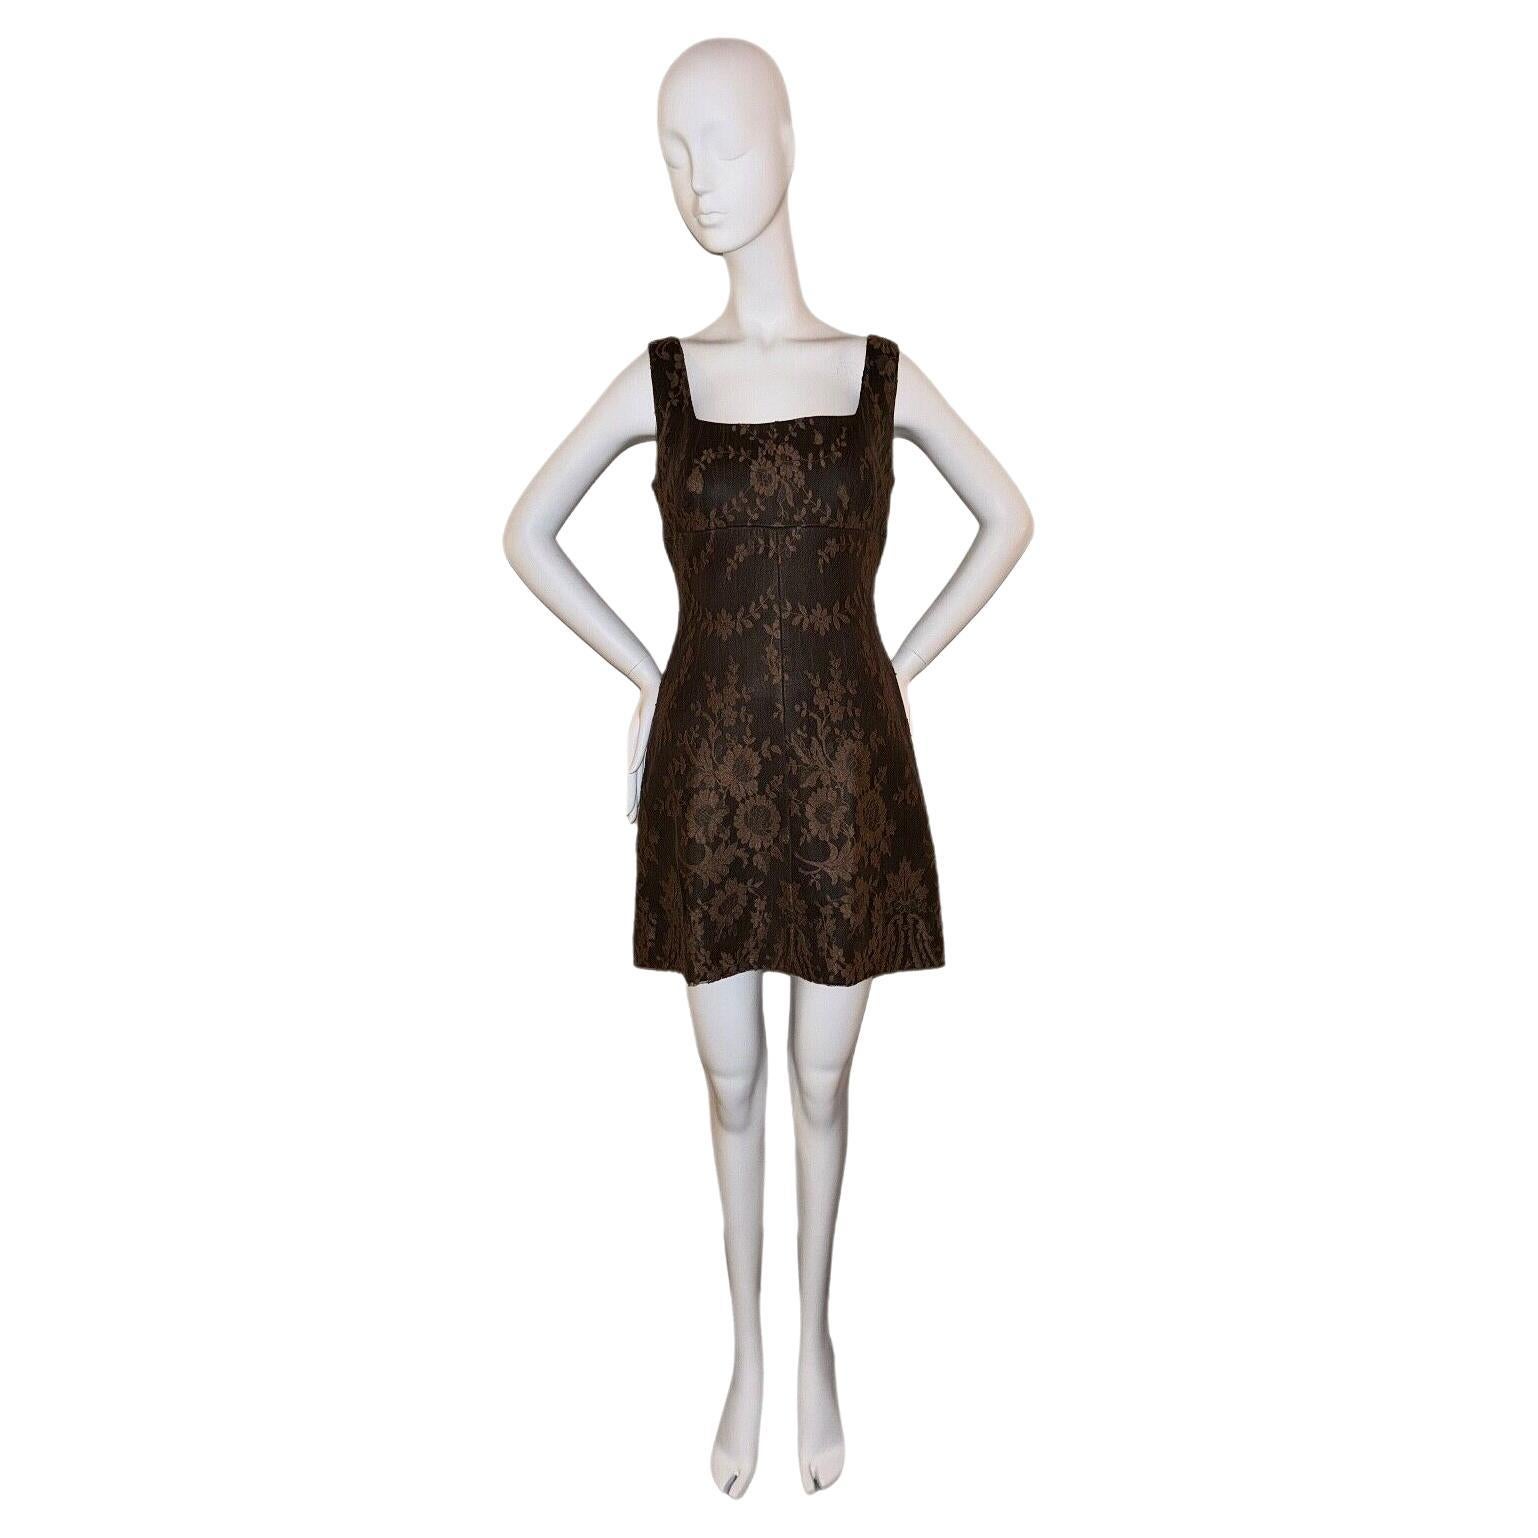 GIANNI VERSACE 1996 vintage leather and lace brown mini dress For Sale